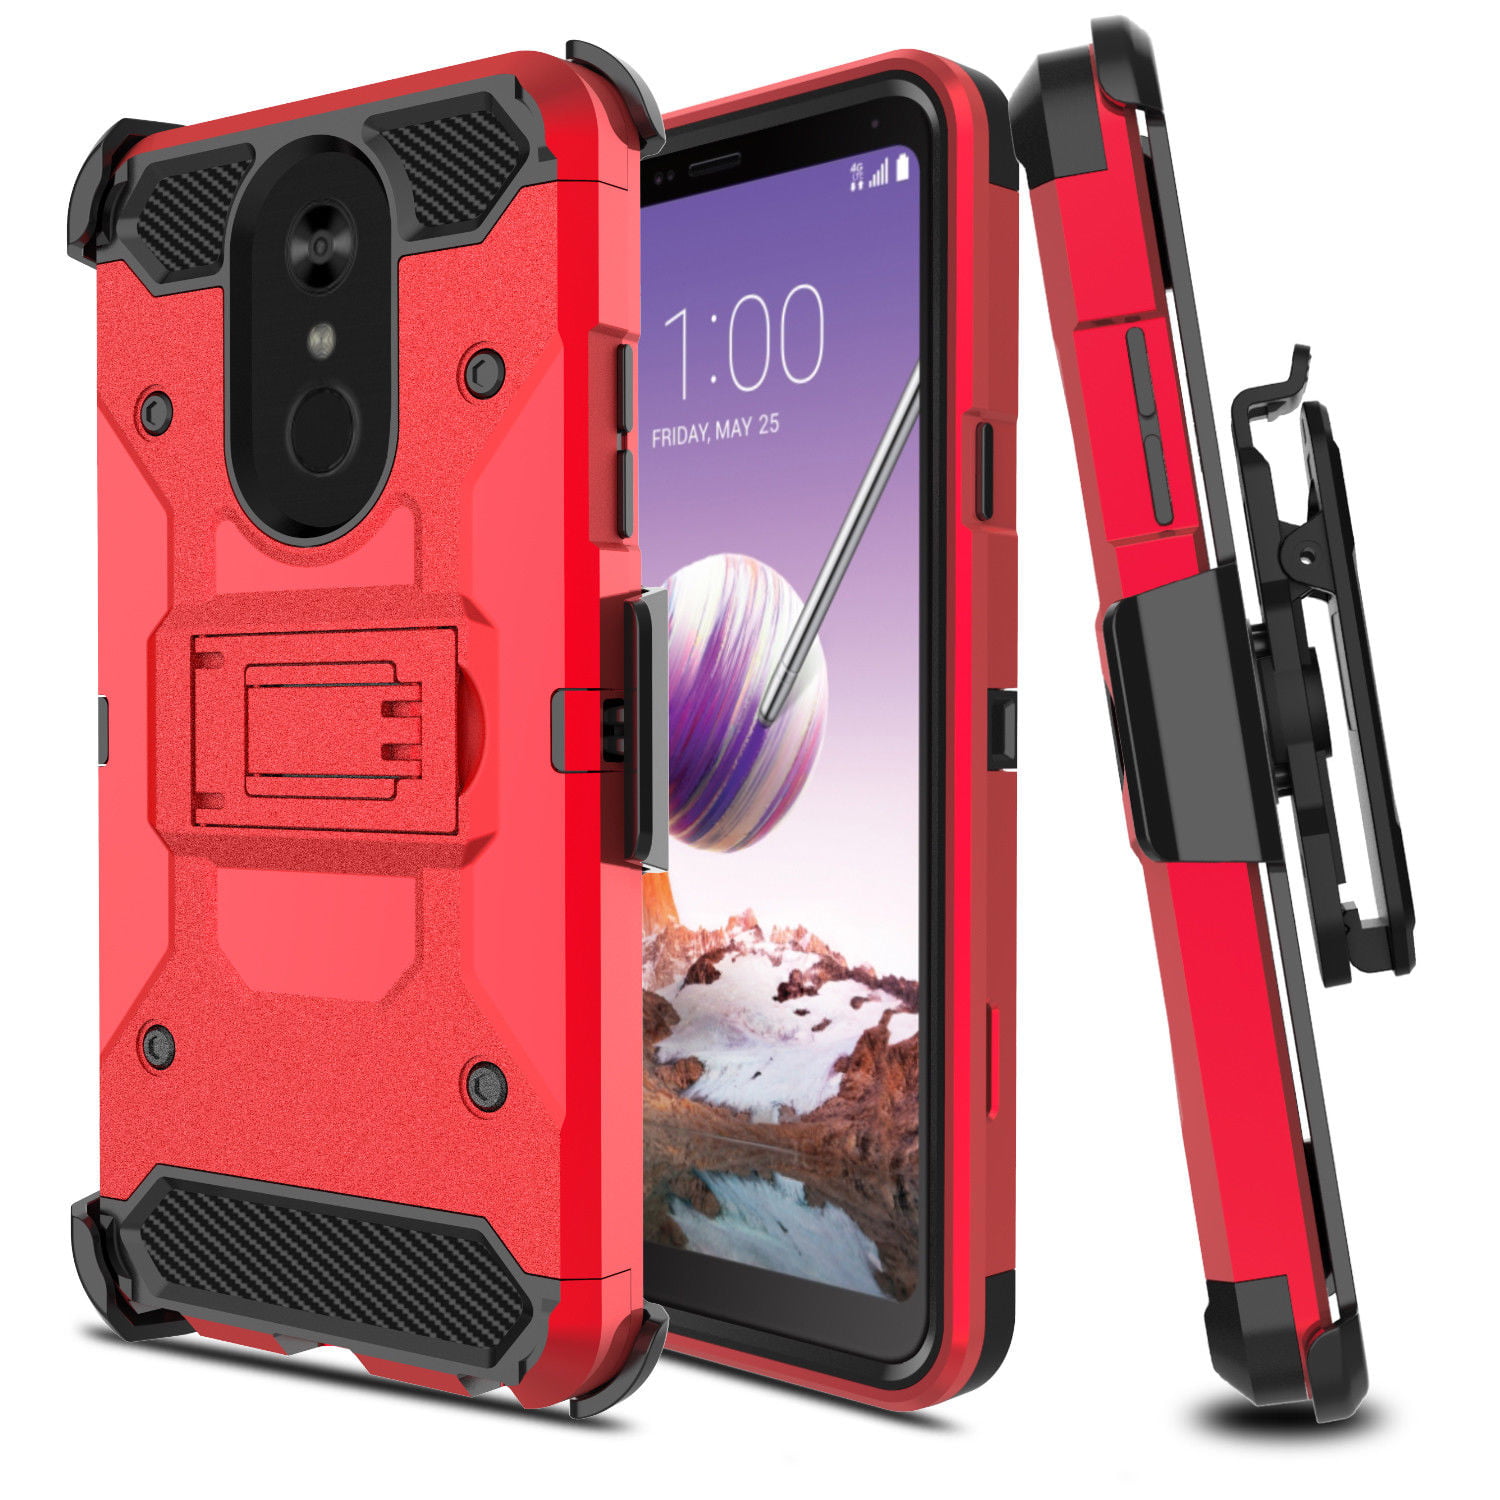 LG Q7 Case, LG Q7 Plus Case, with [Tempered Glass Screen Protector] Full  Coverage [Tank Armor]Dual Layers Phone Cover with Kickstand and Locking  Belt 